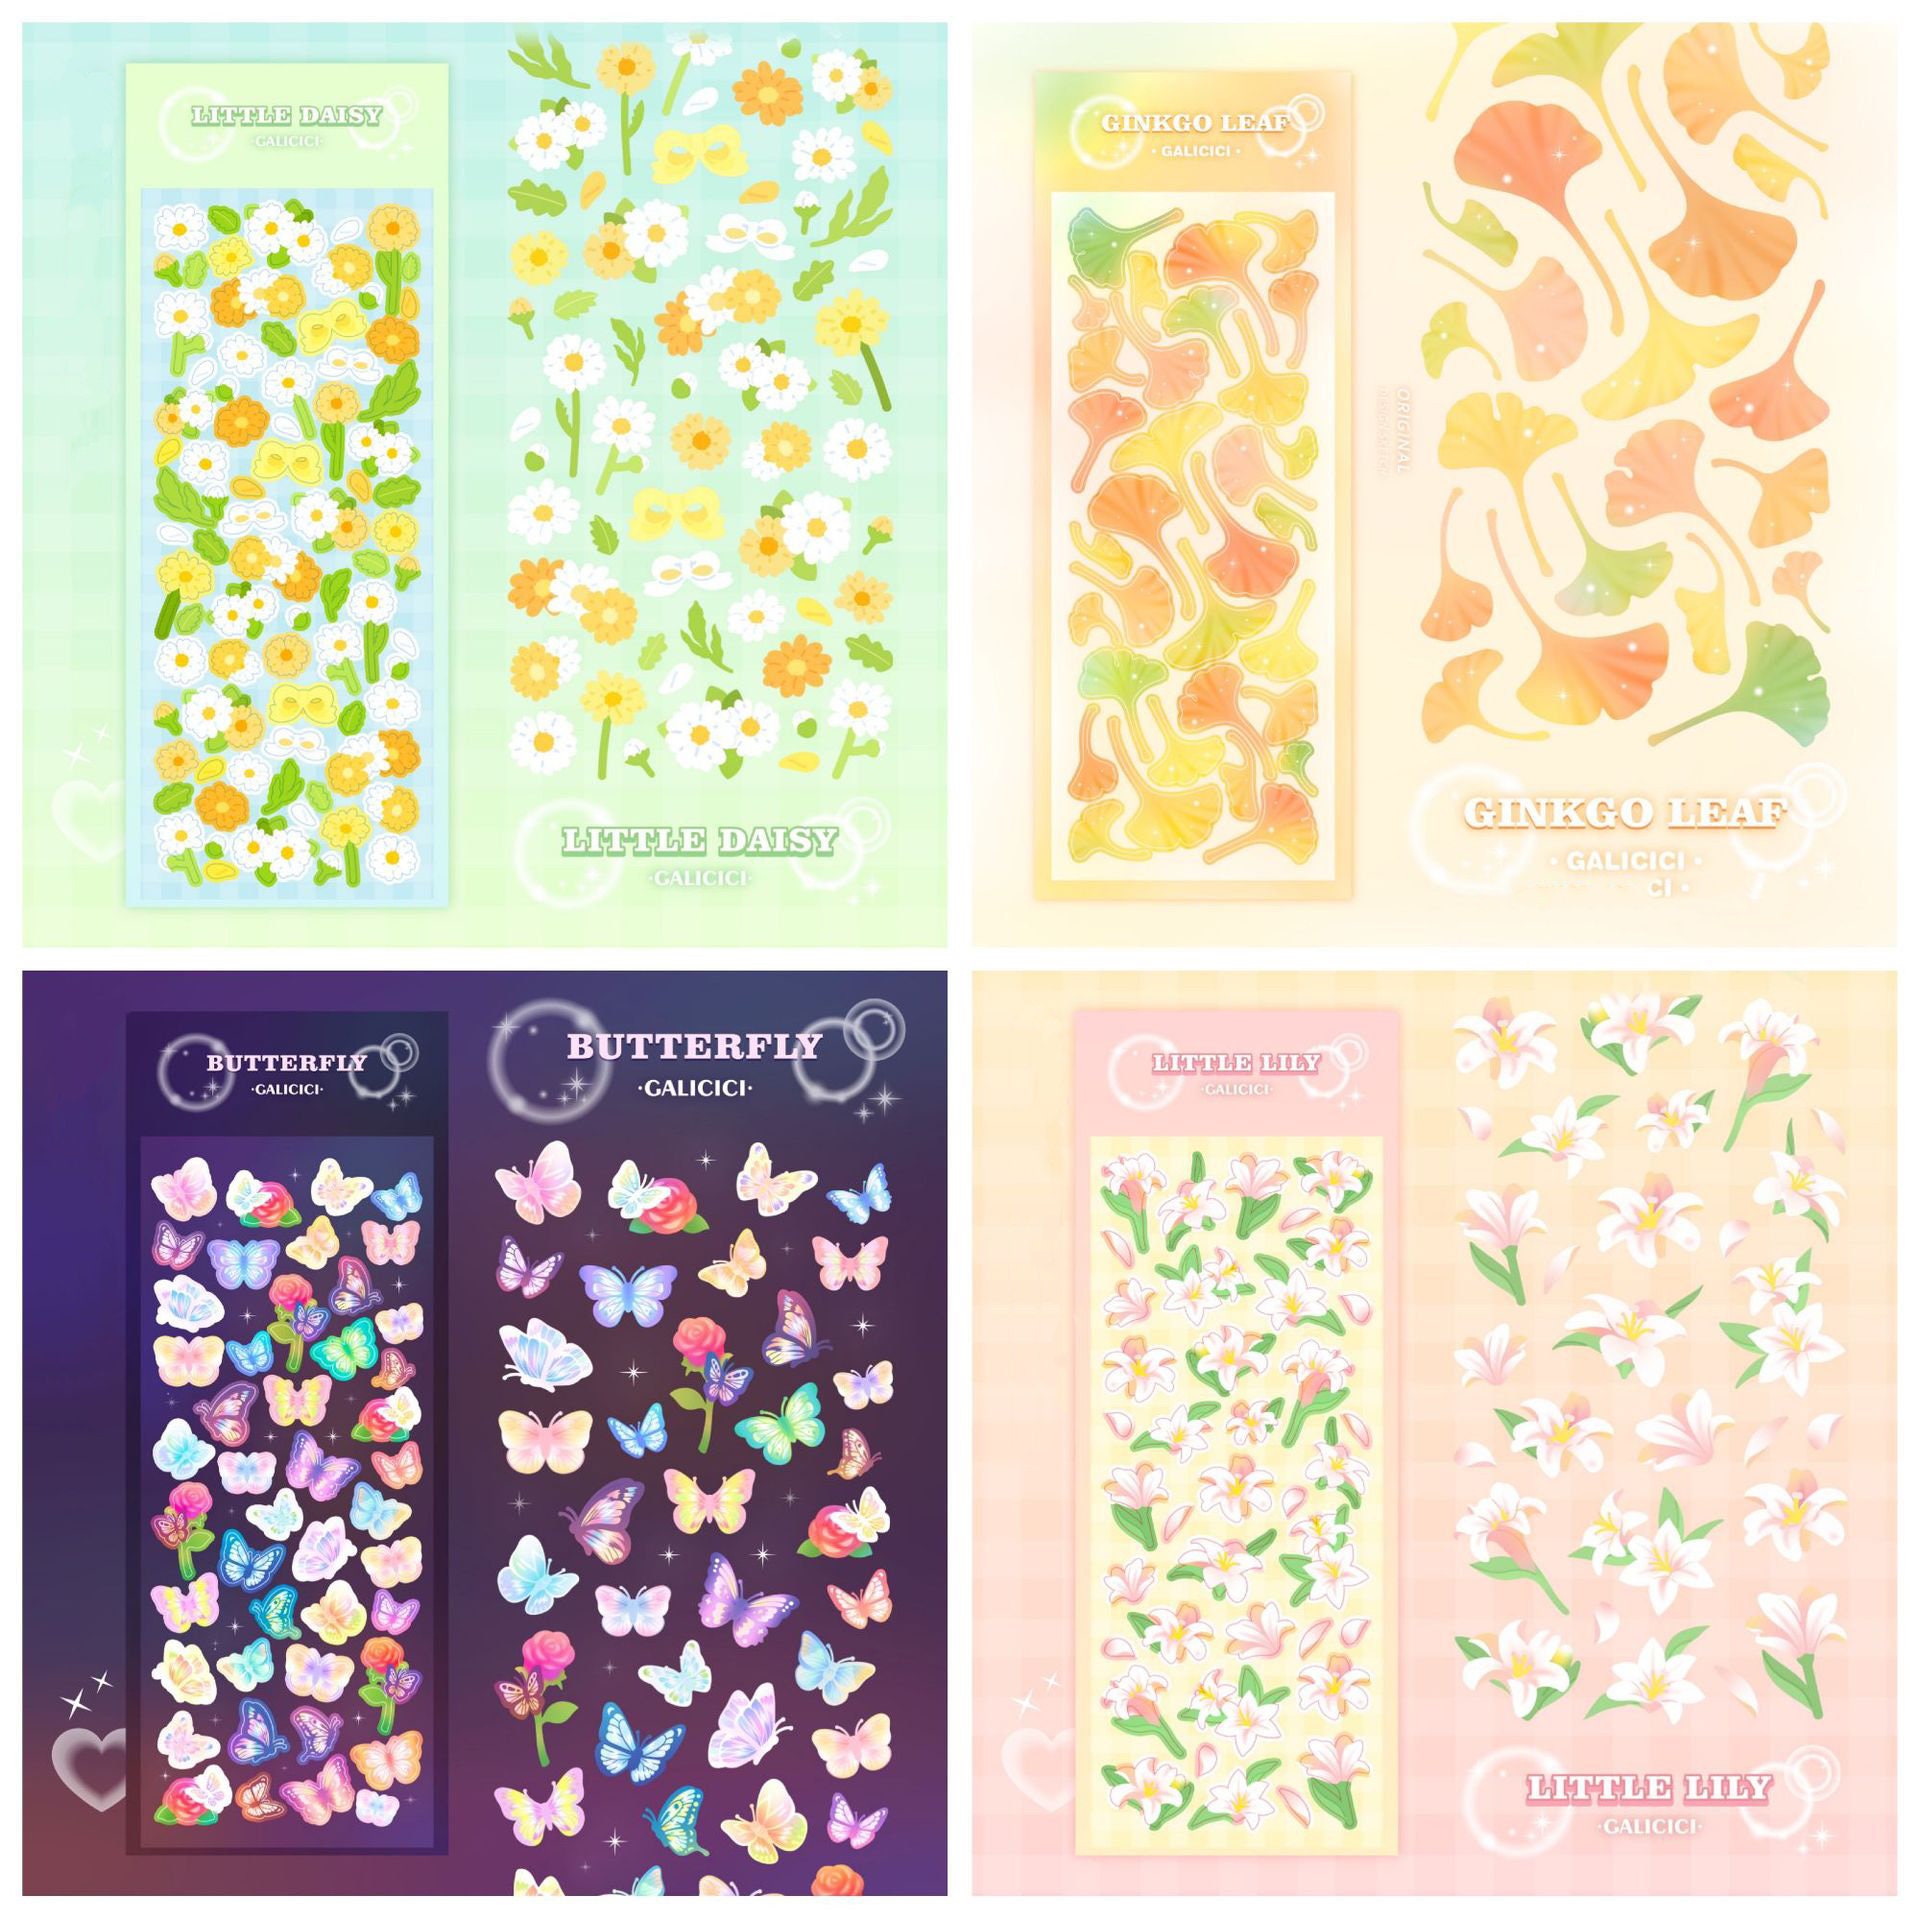 16 Sheets Colorful Photocard Stickers Cute Korean Deco Stickers Kpop Stickers for Photocards Ribbon Butterfly Heart Alphabet Cute Stickers for